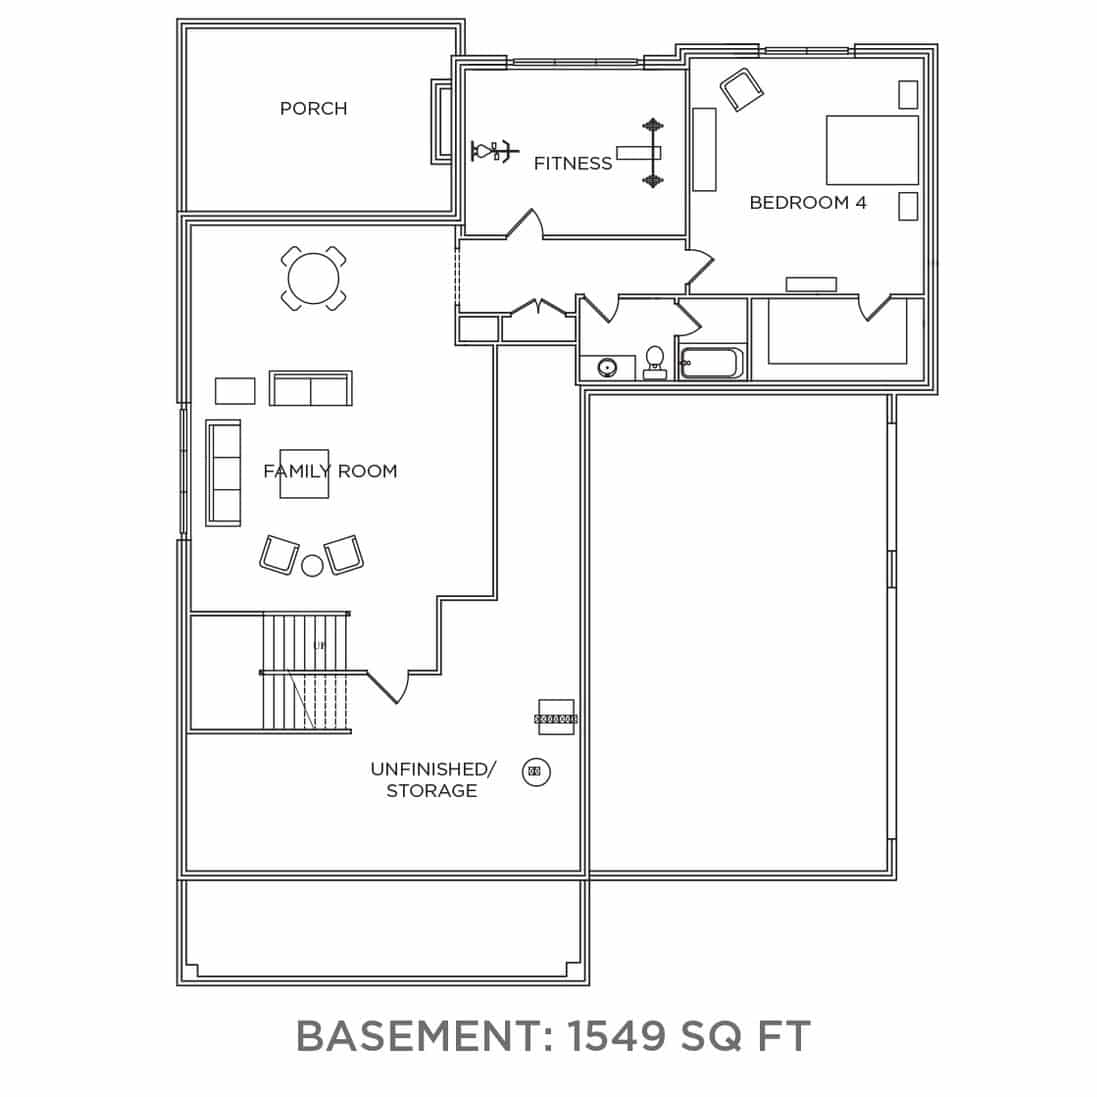 A floor plan for a Custom Home with a Basement in Carmel, Indiana.